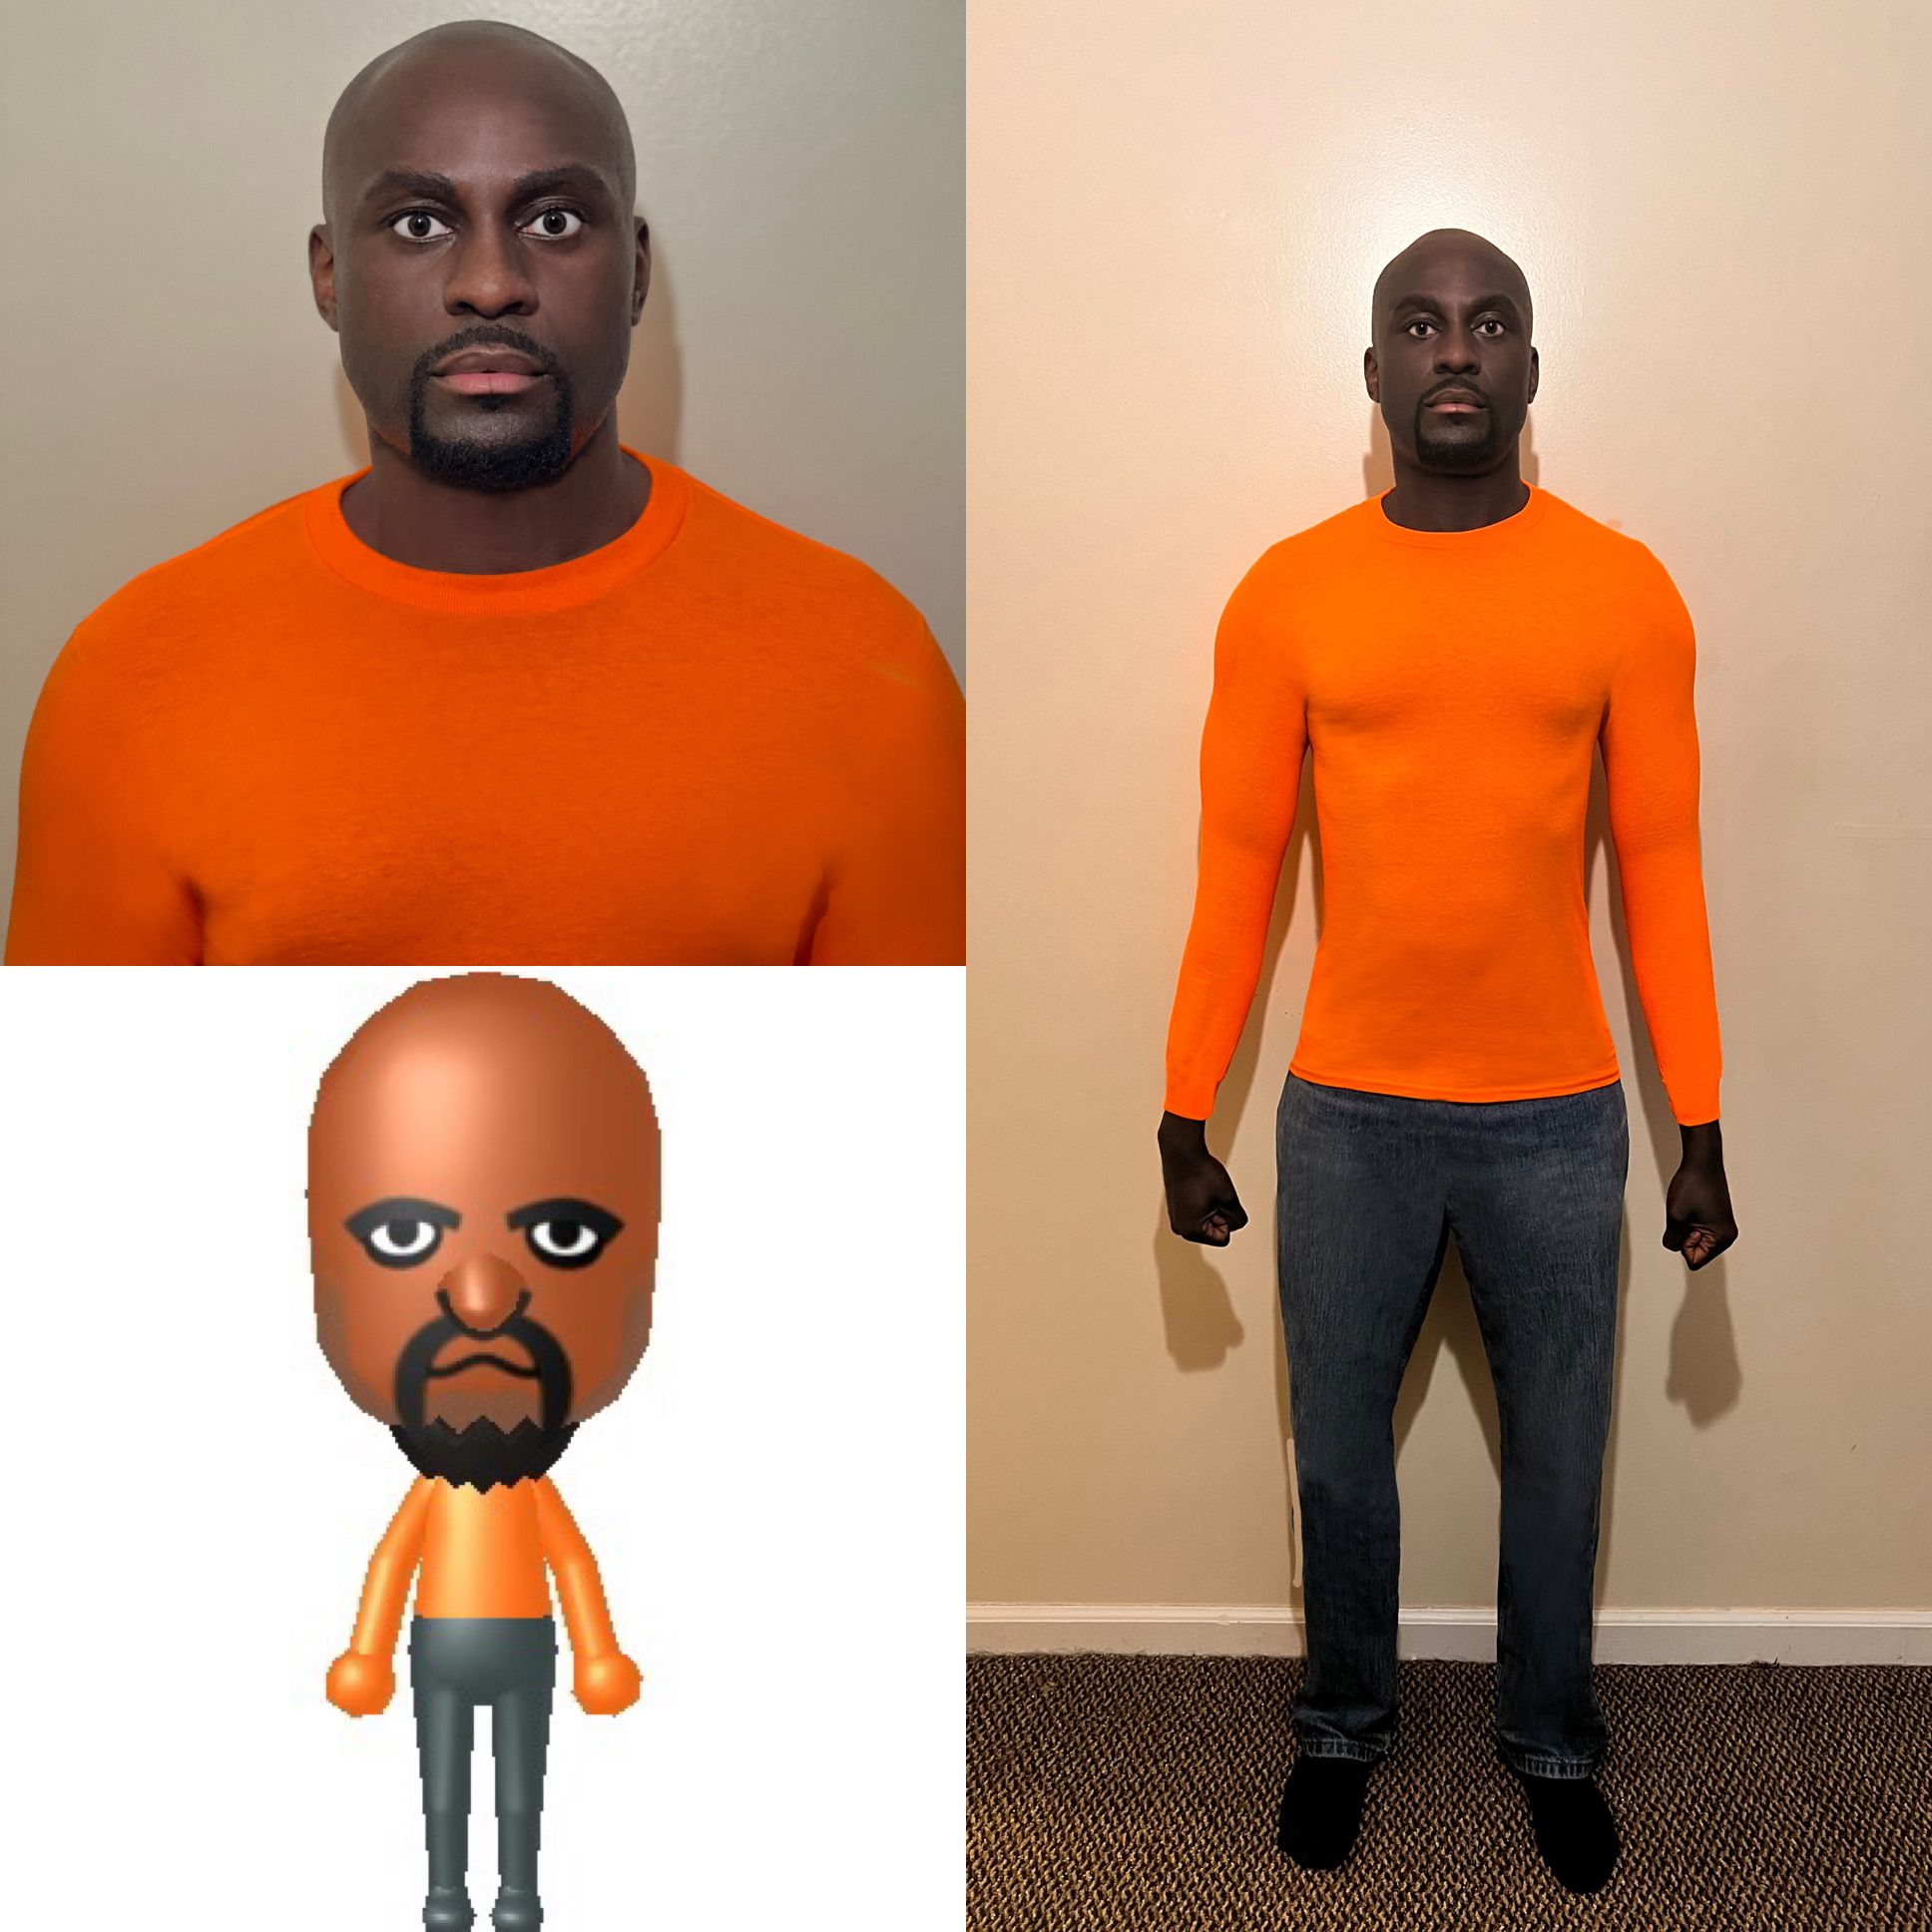 “You kinda look like Matt from Wii Sports,” they said. What do you guys think?